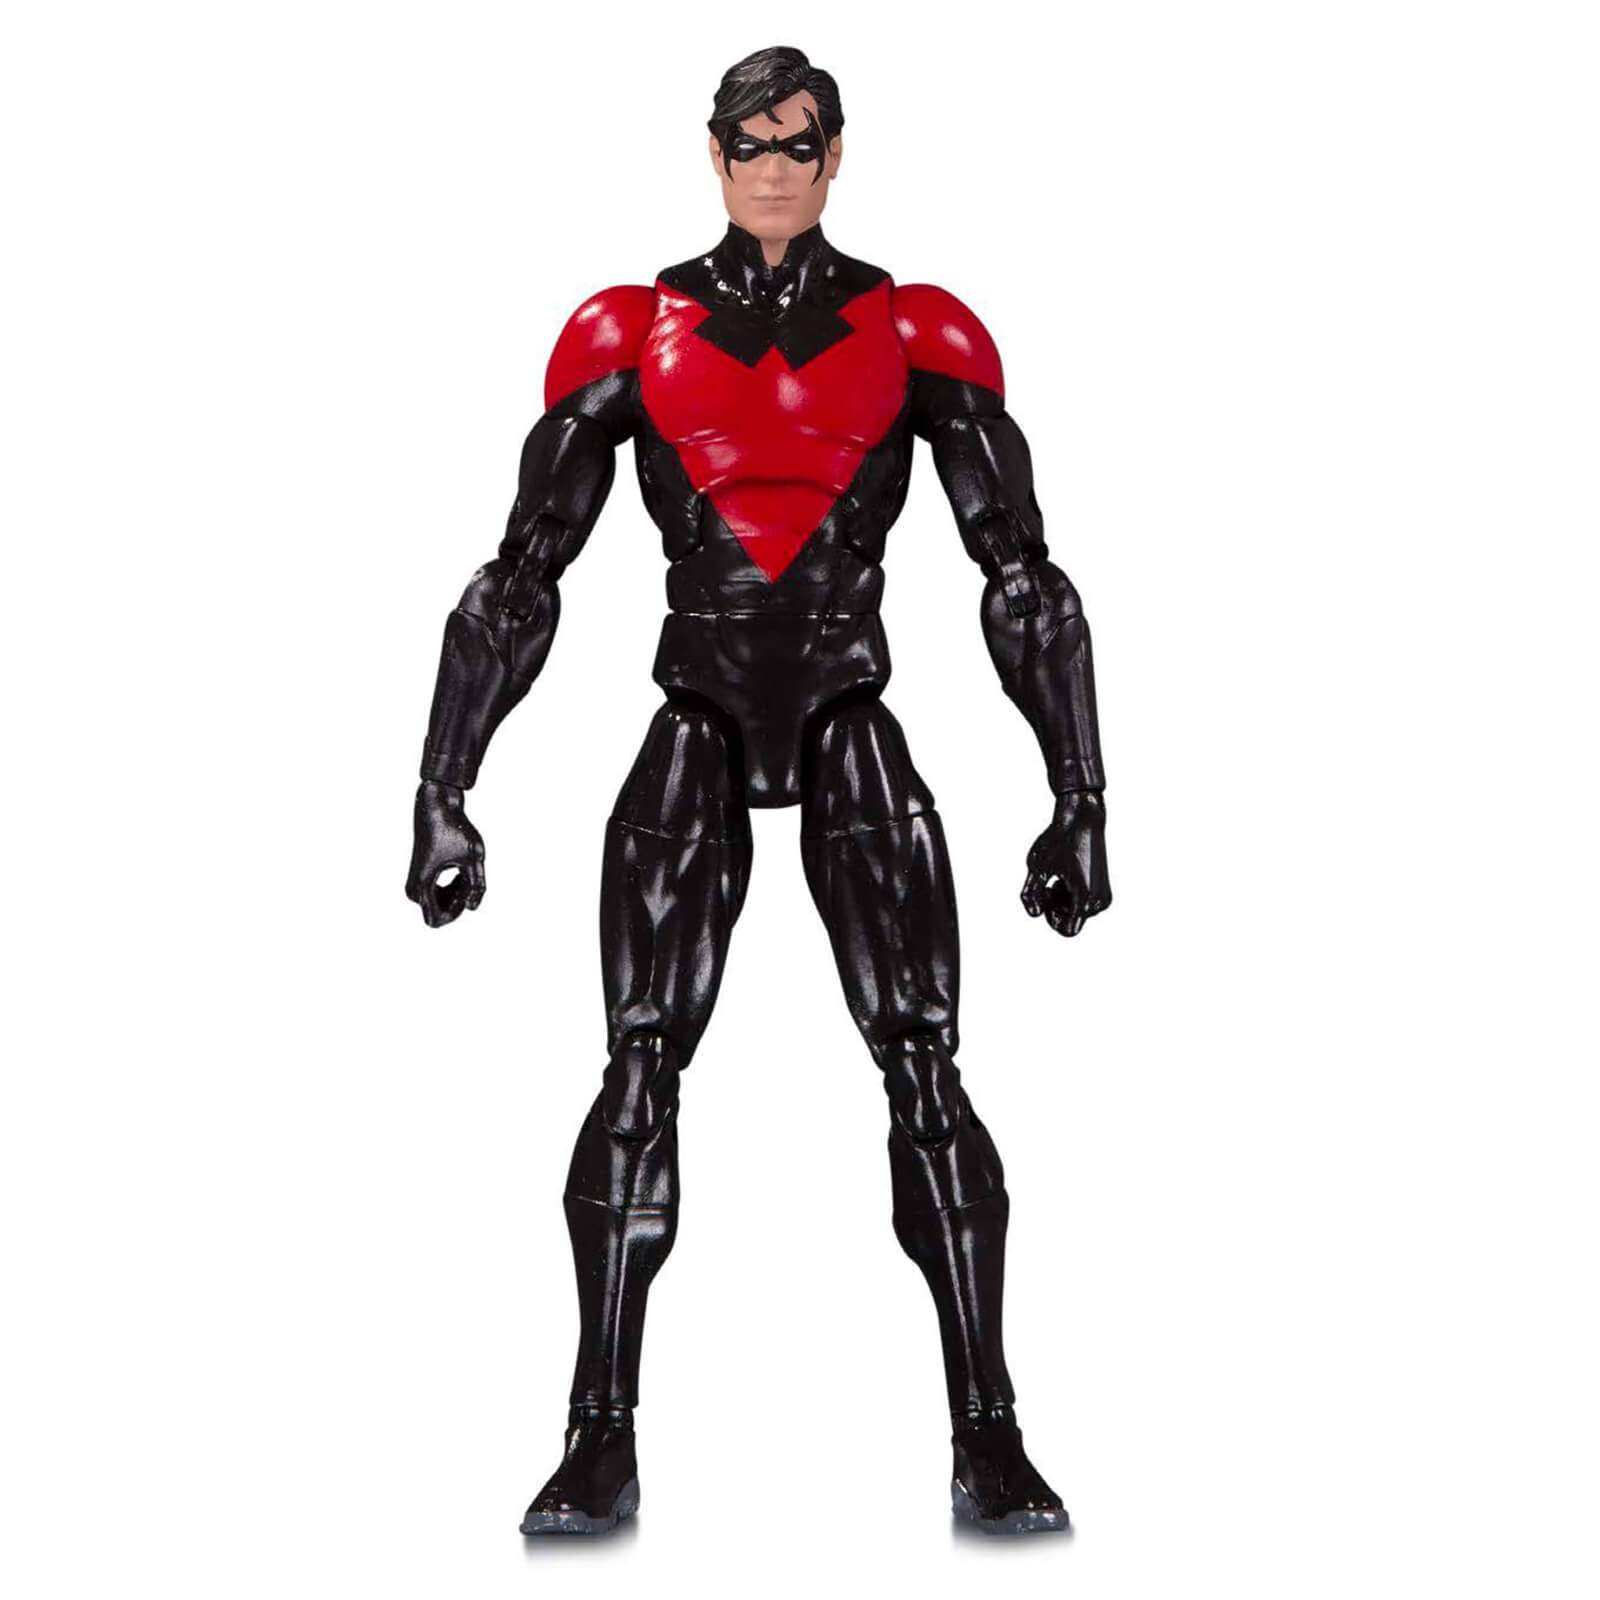 DC Collectibles DC Essentials Action Figure - New 52 Nightwing